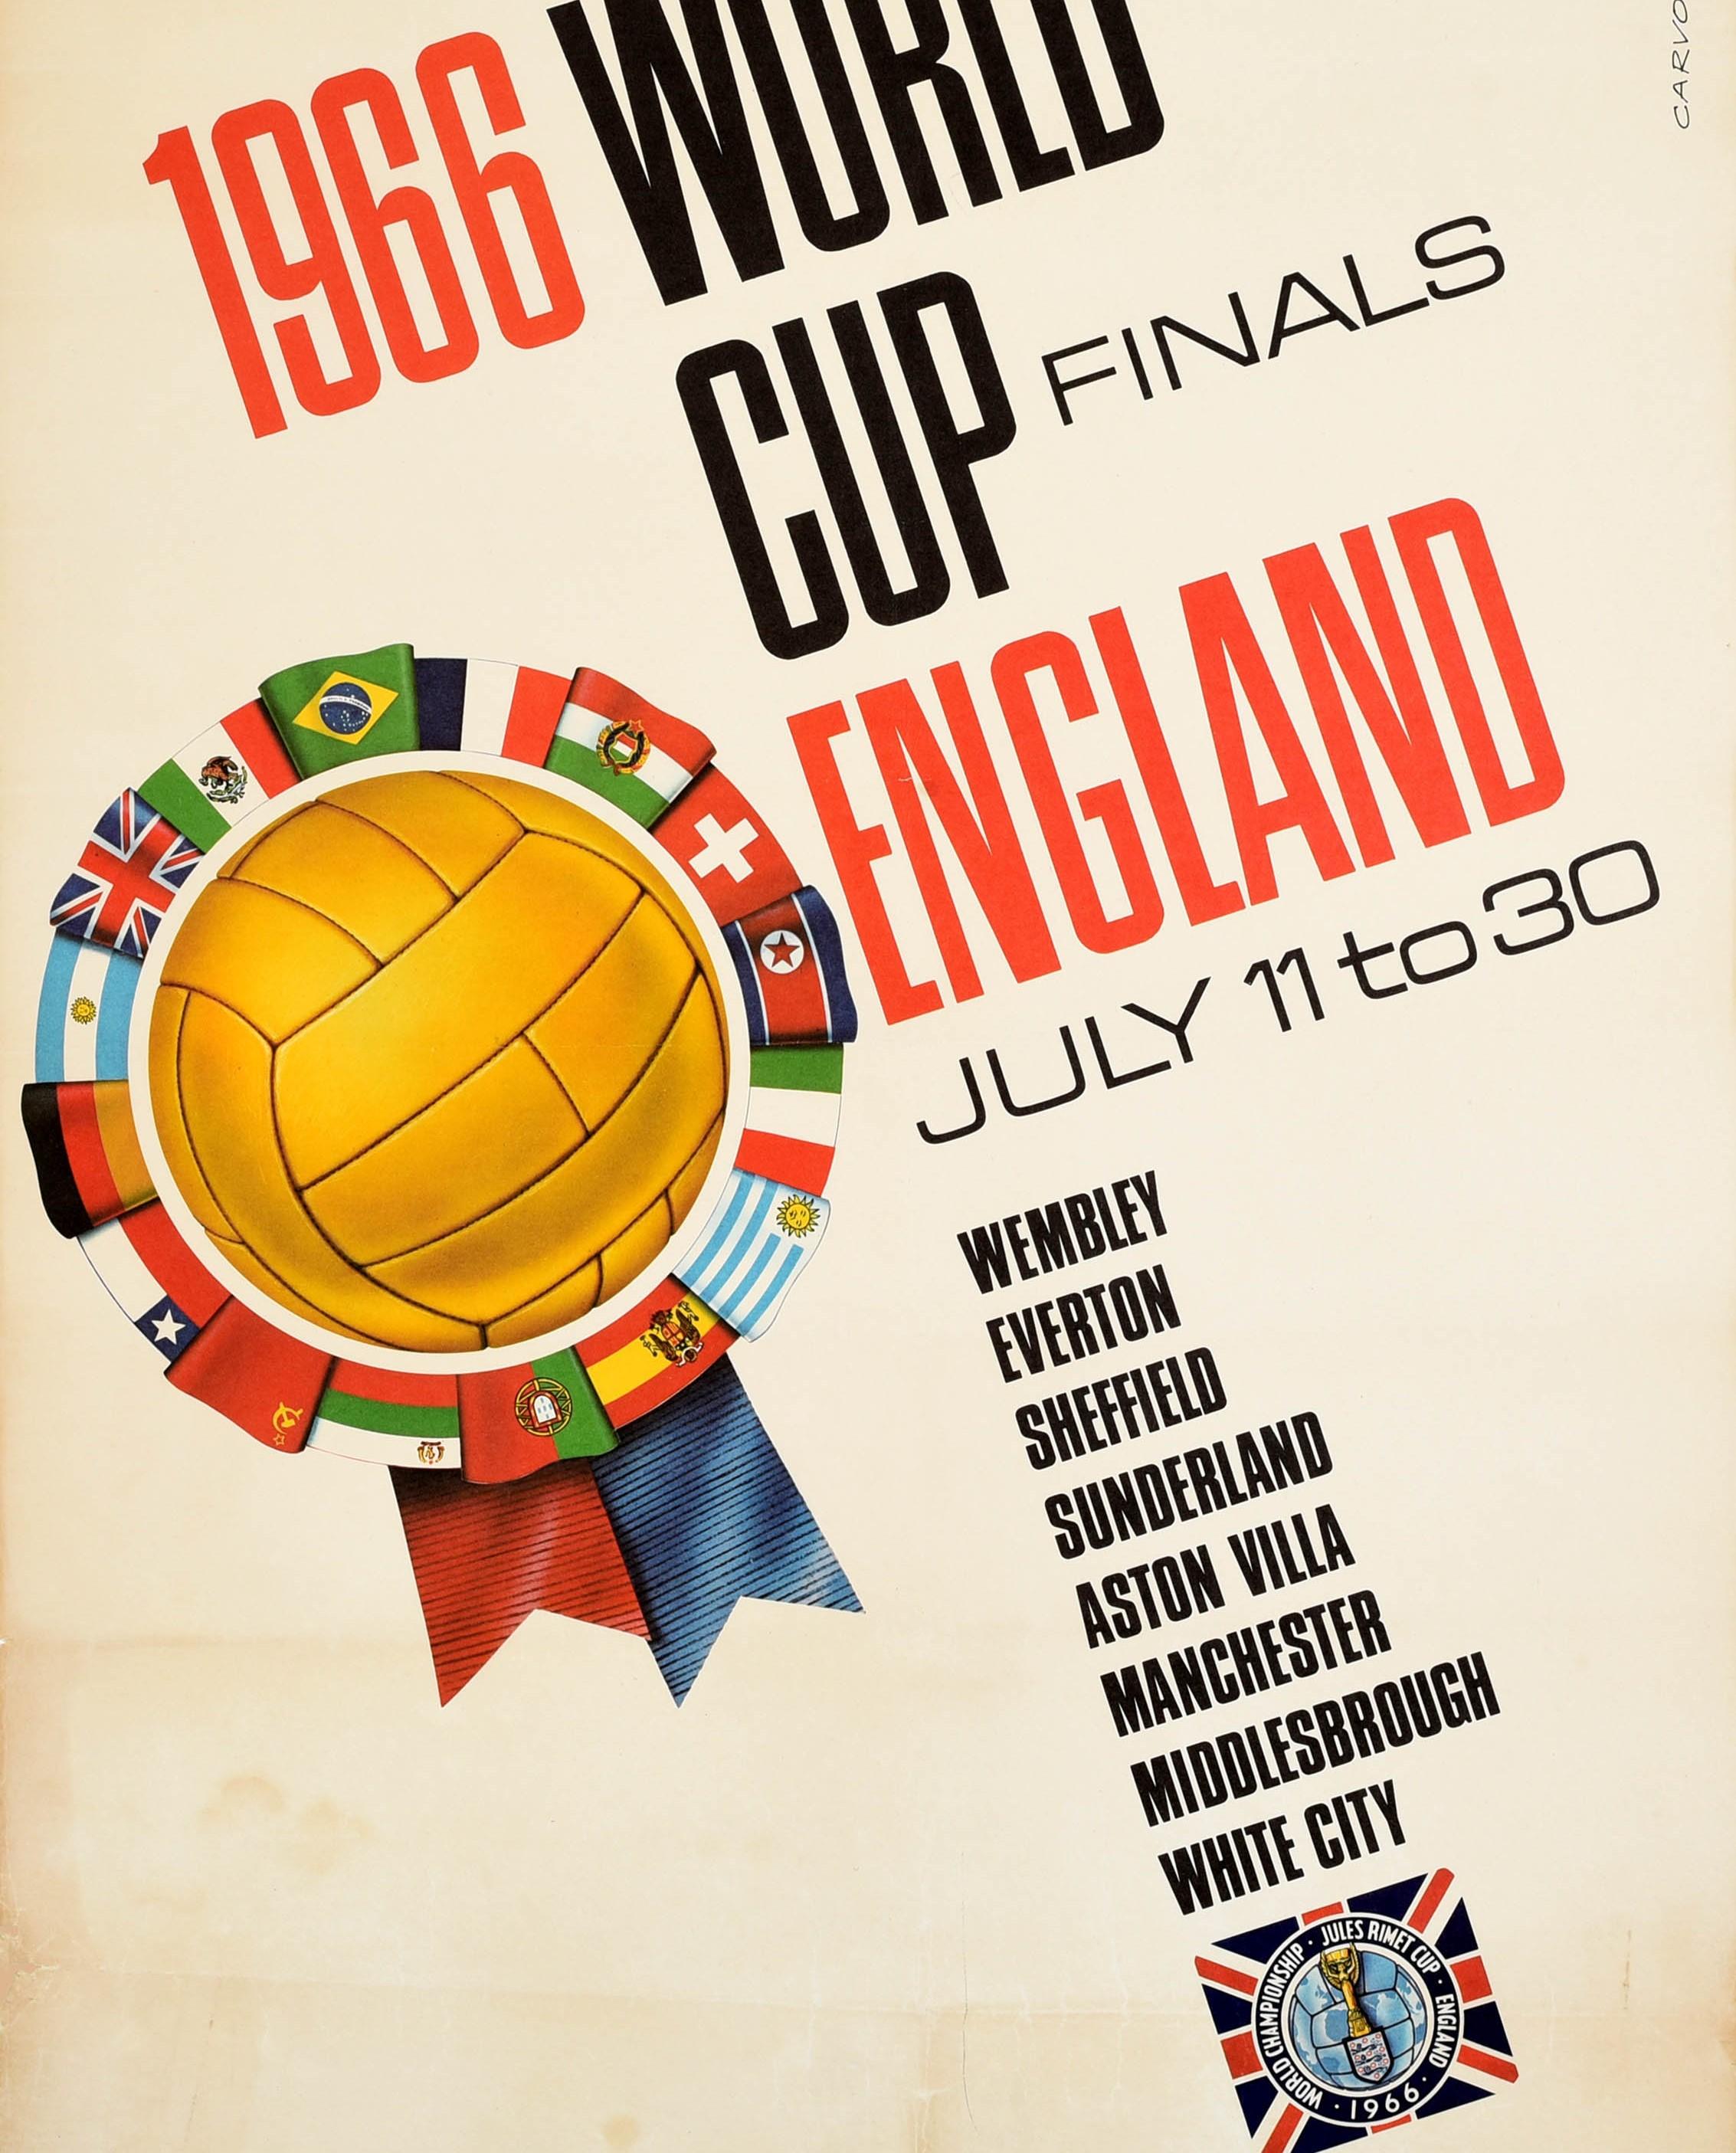 1966 world cup poster